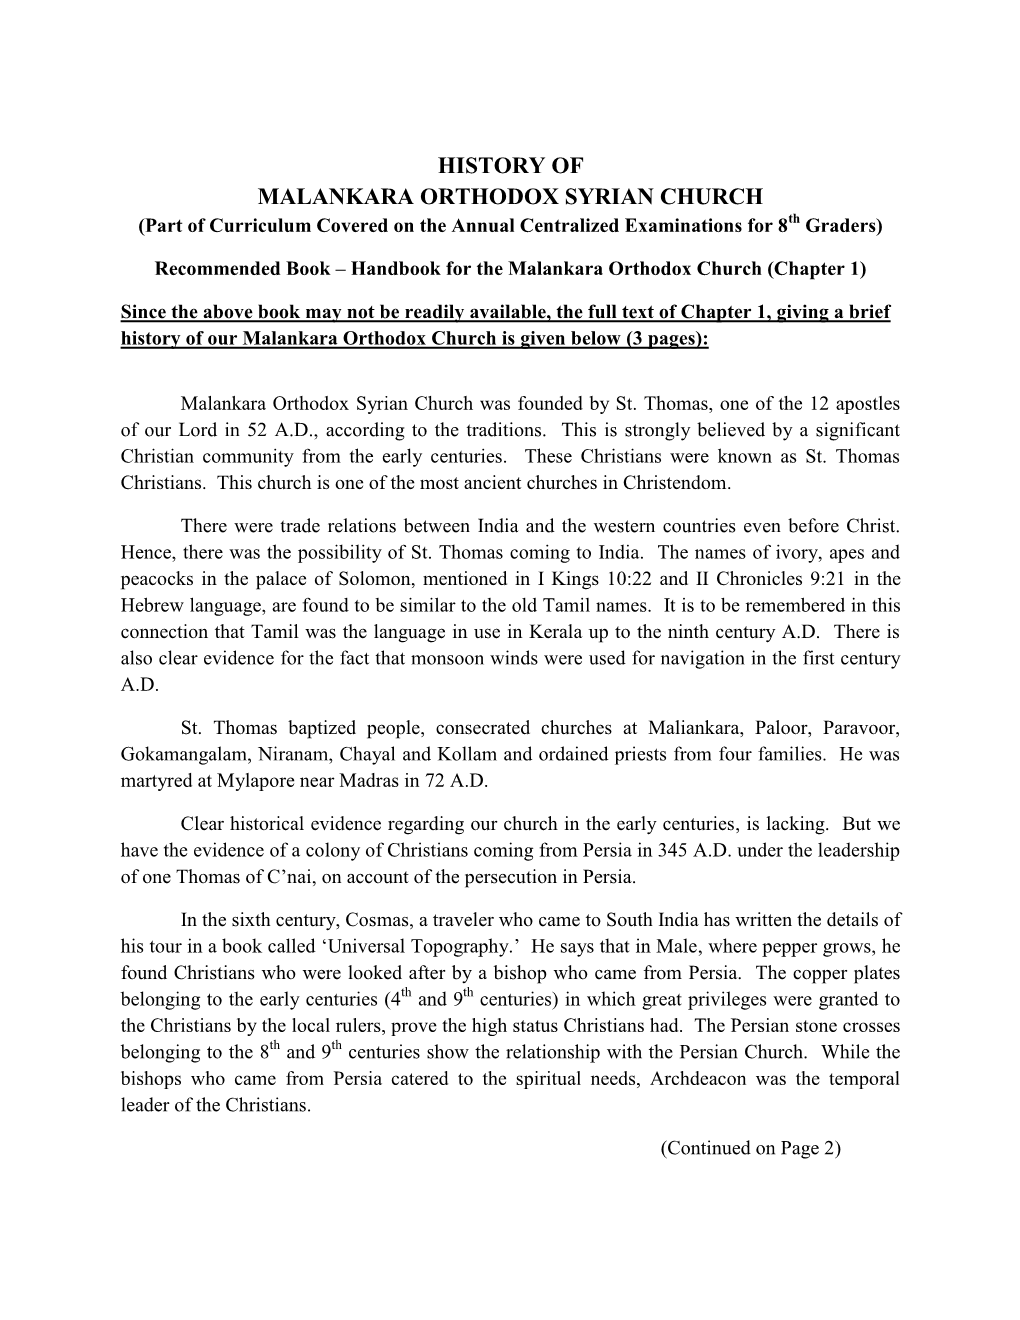 HISTORY of MALANKARA ORTHODOX SYRIAN CHURCH (Part of Curriculum Covered on the Annual Centralized Examinations for 8Th Graders)